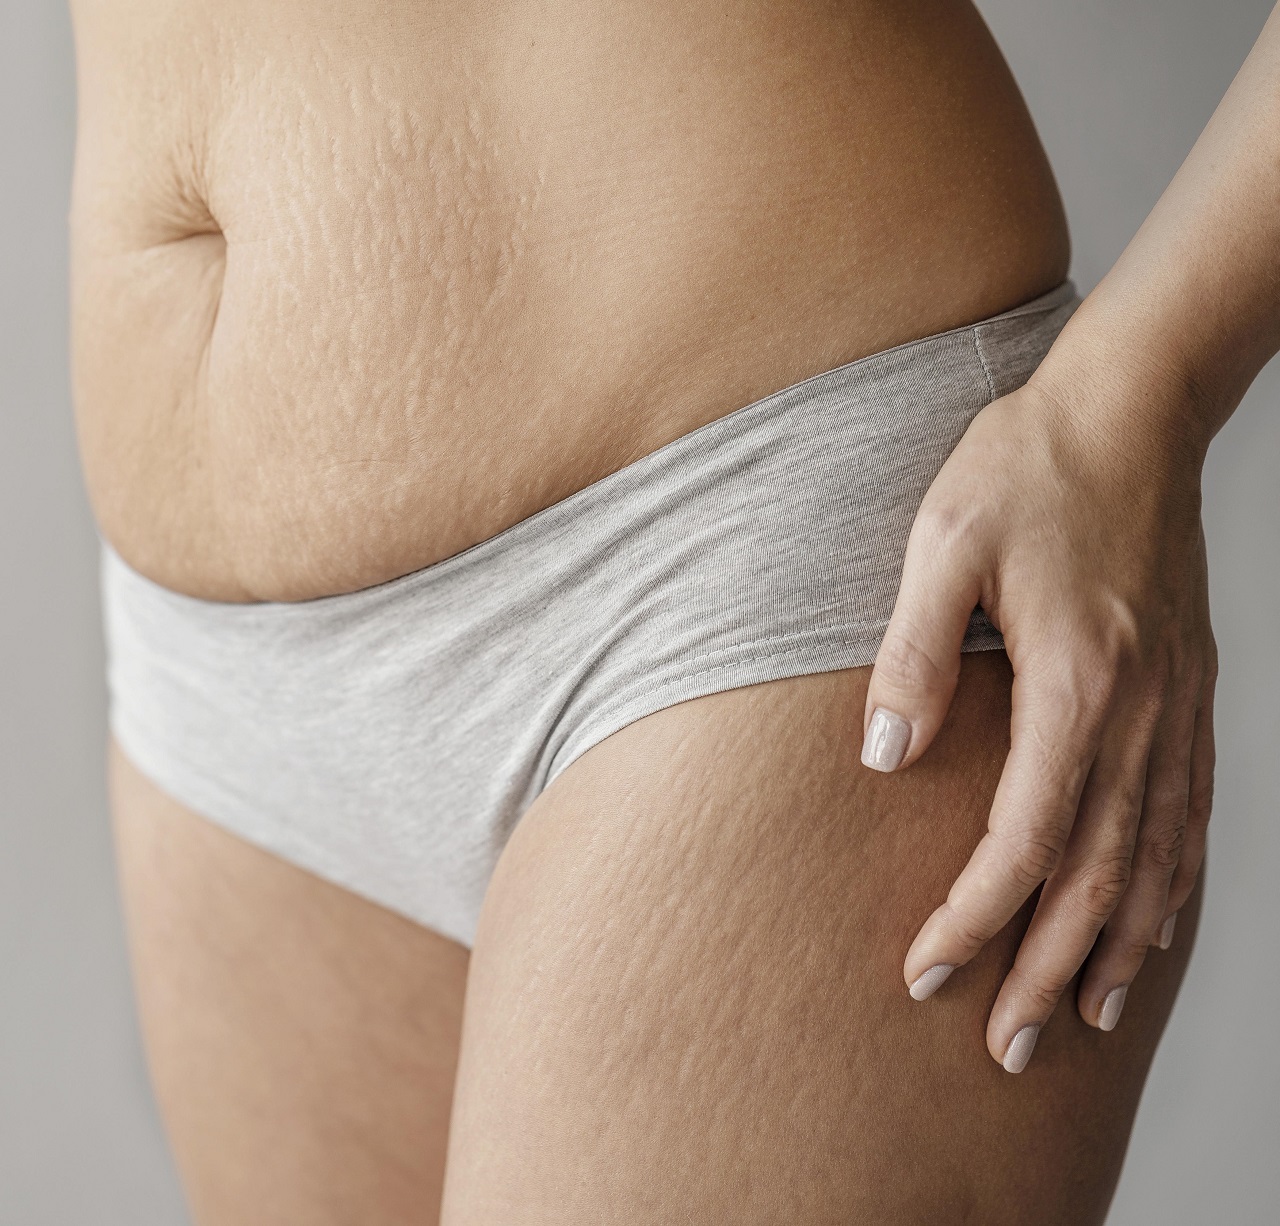 7 Things You Need to Know About Treating Stretch Marks